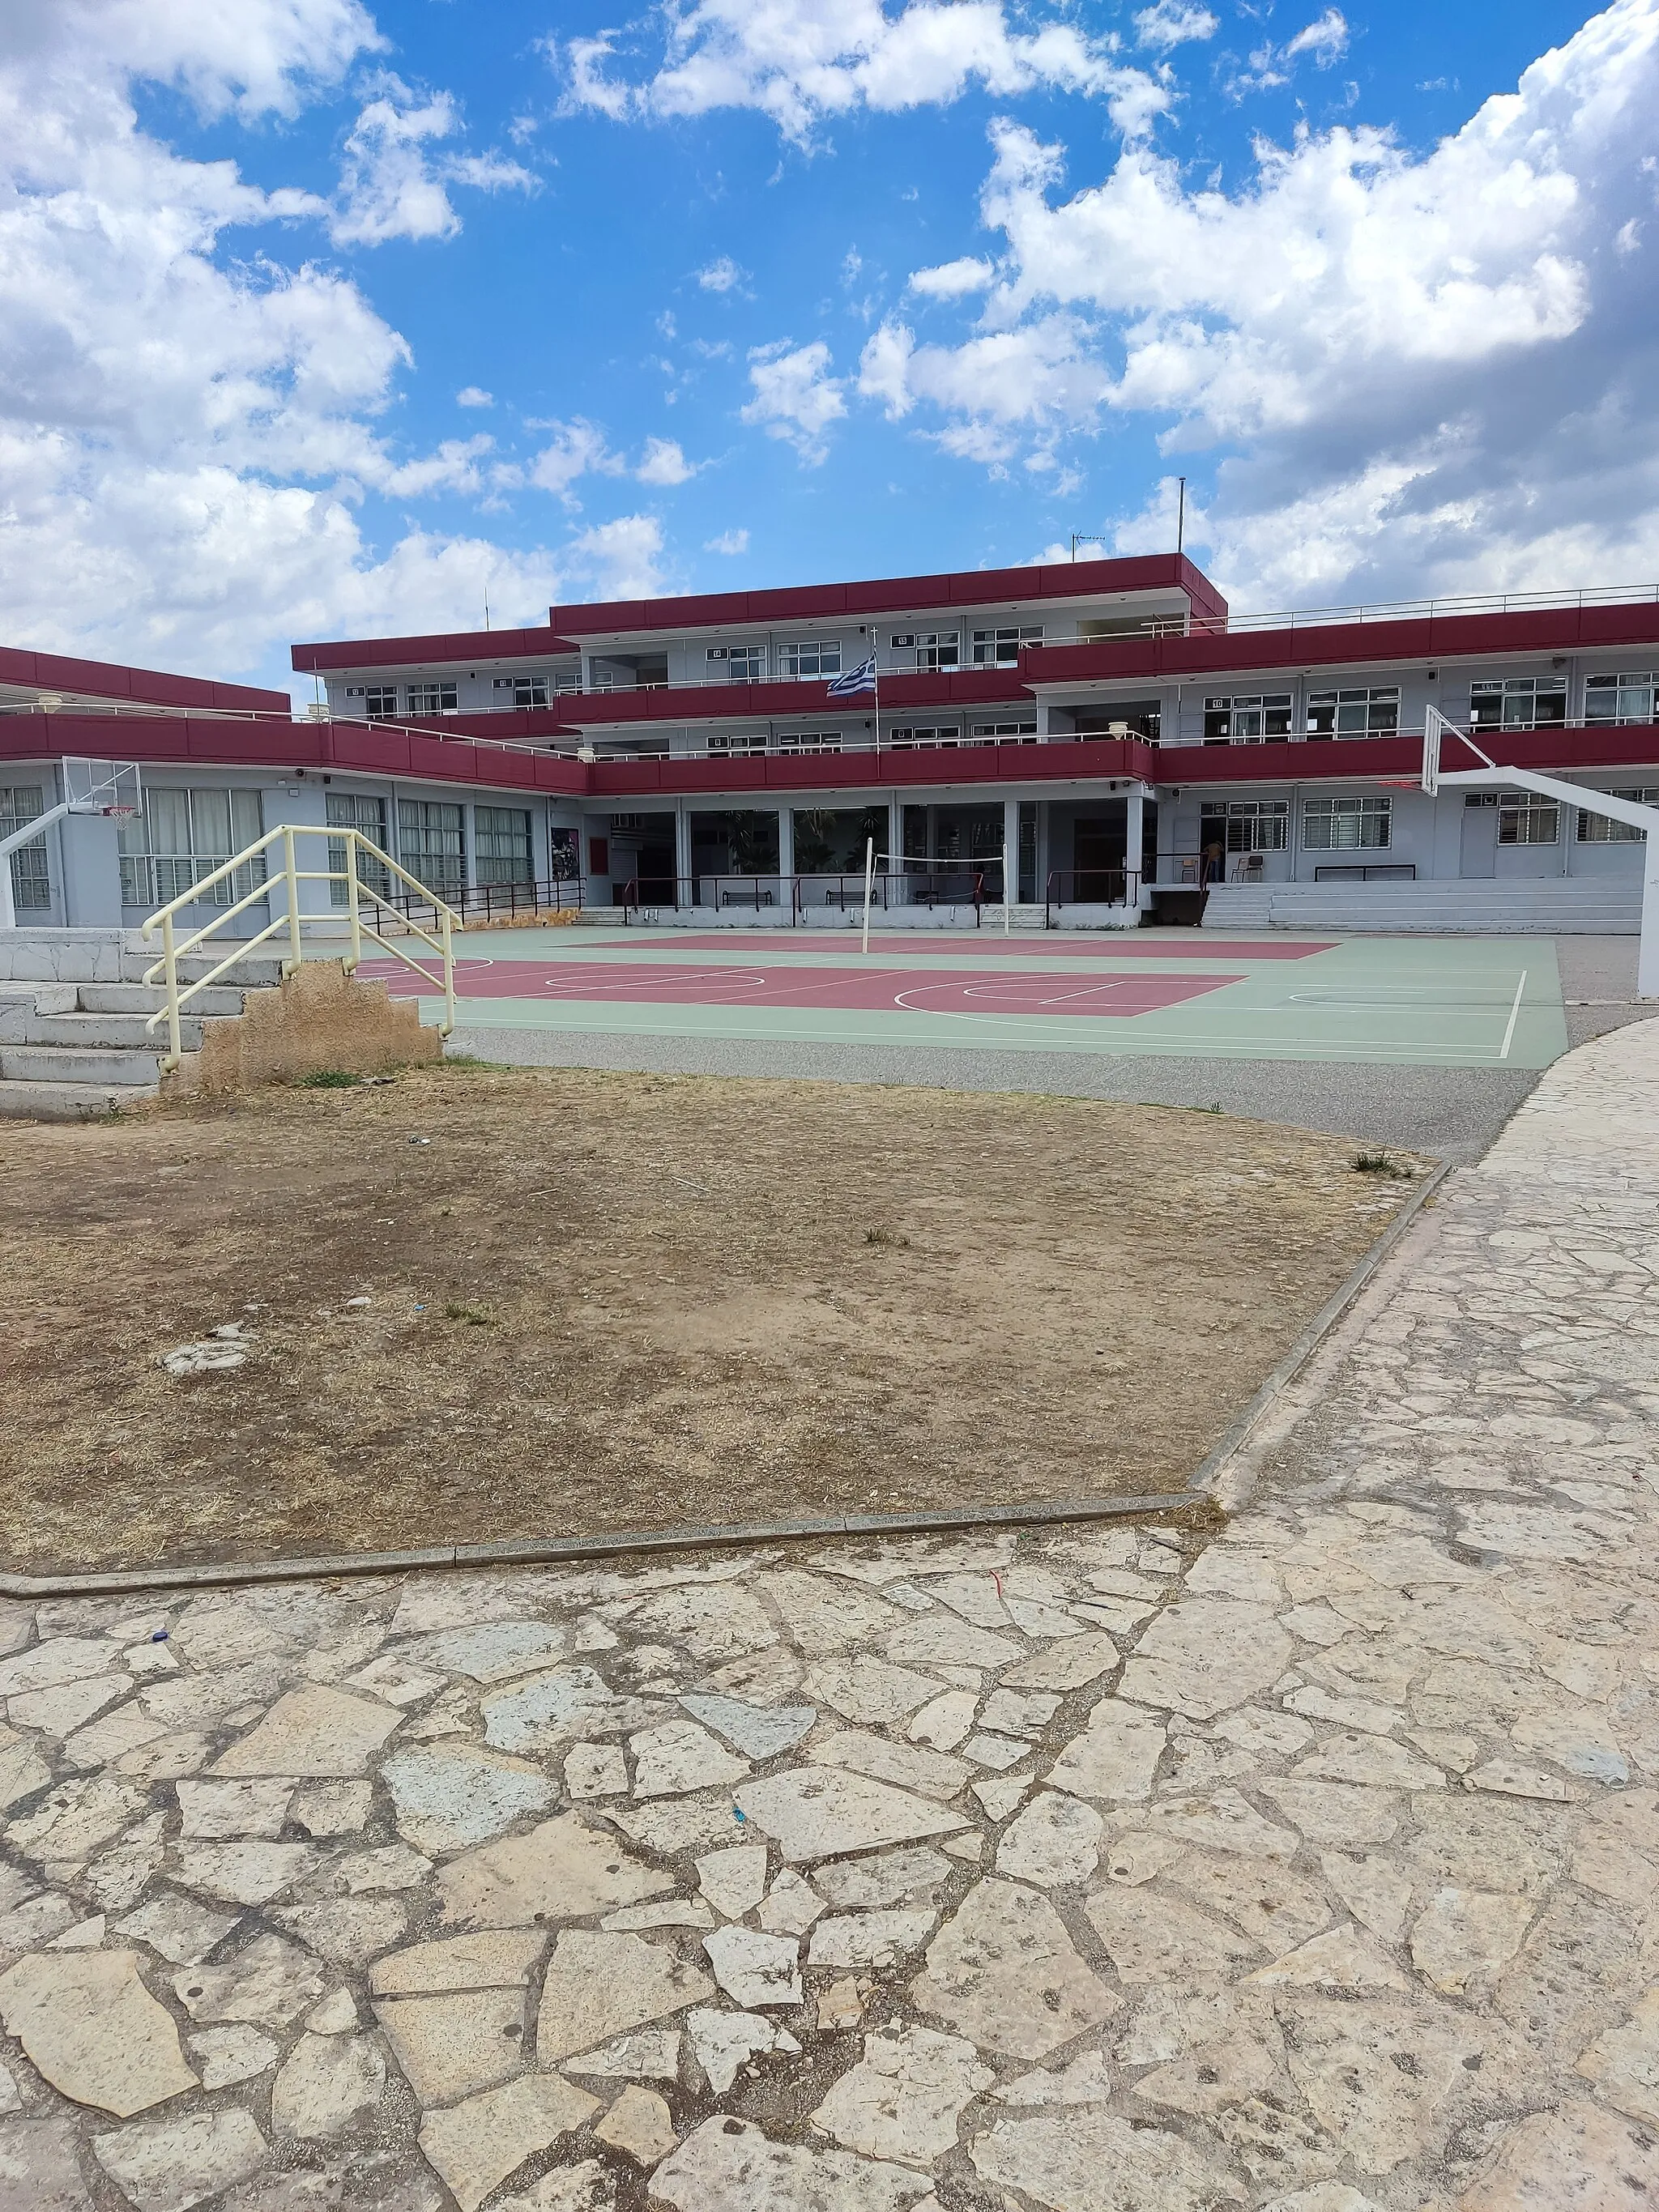 Photo showing: The first High school of Argos in Greece in June 10th, 2022. I shot the photo shortly after I completed my national exams.